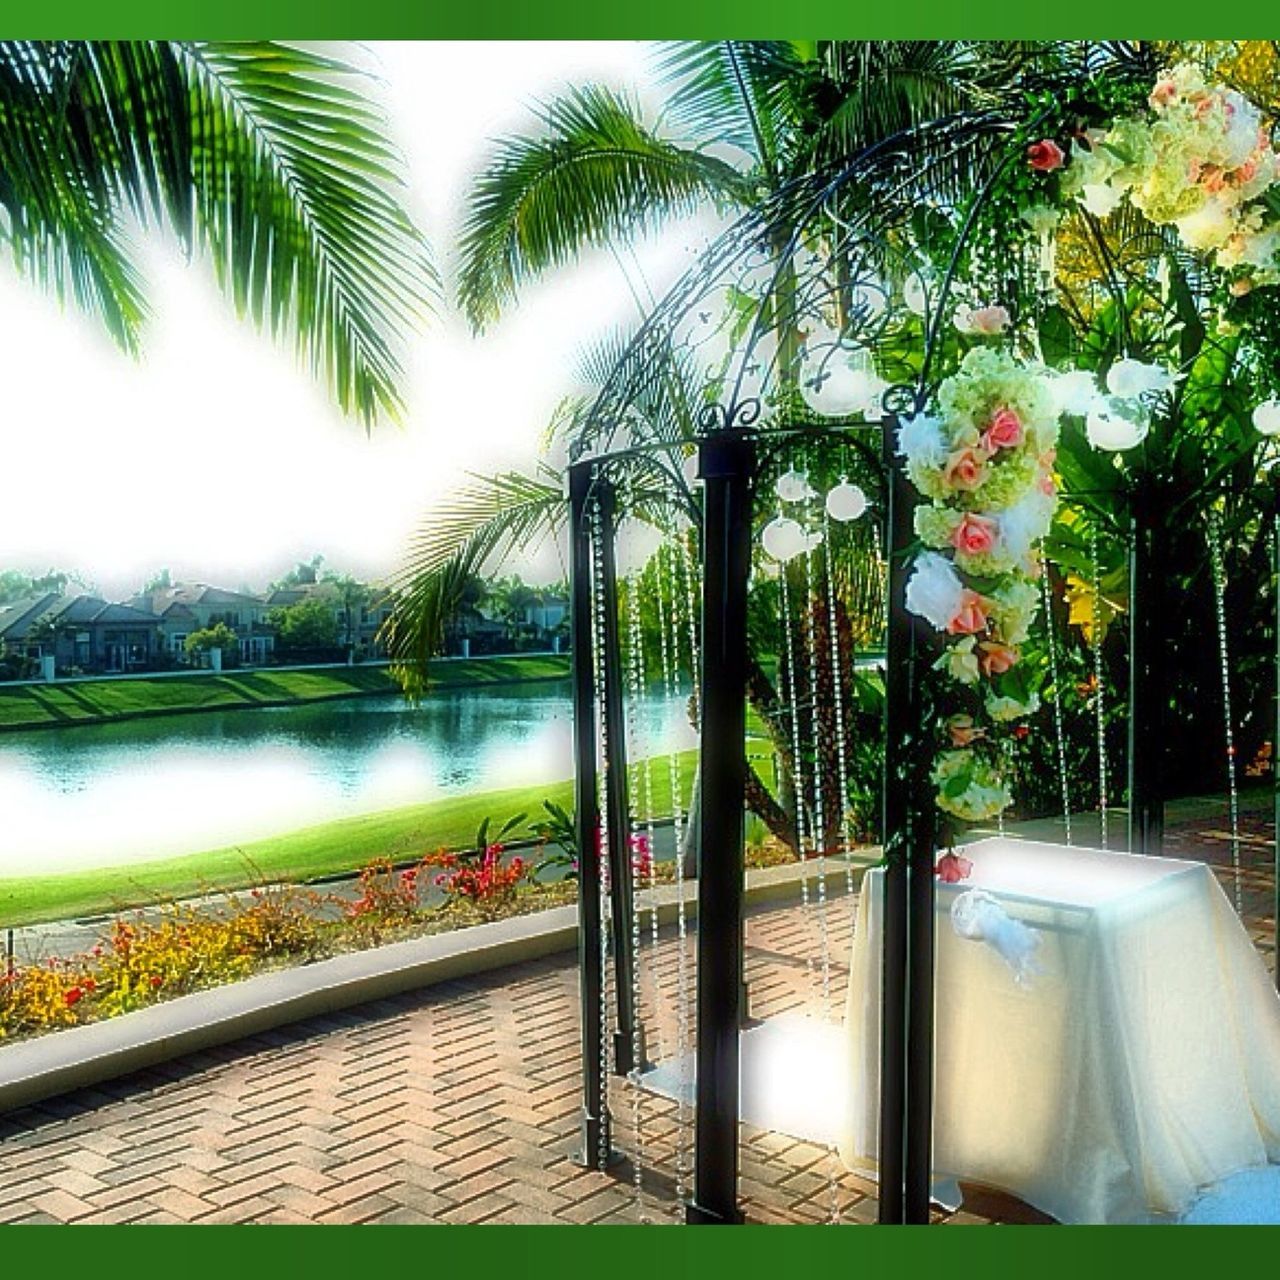 water, tree, growth, flower, beauty in nature, nature, plant, reflection, park - man made space, fountain, railing, lake, pond, tranquility, day, sky, sunlight, tranquil scene, grass, outdoors